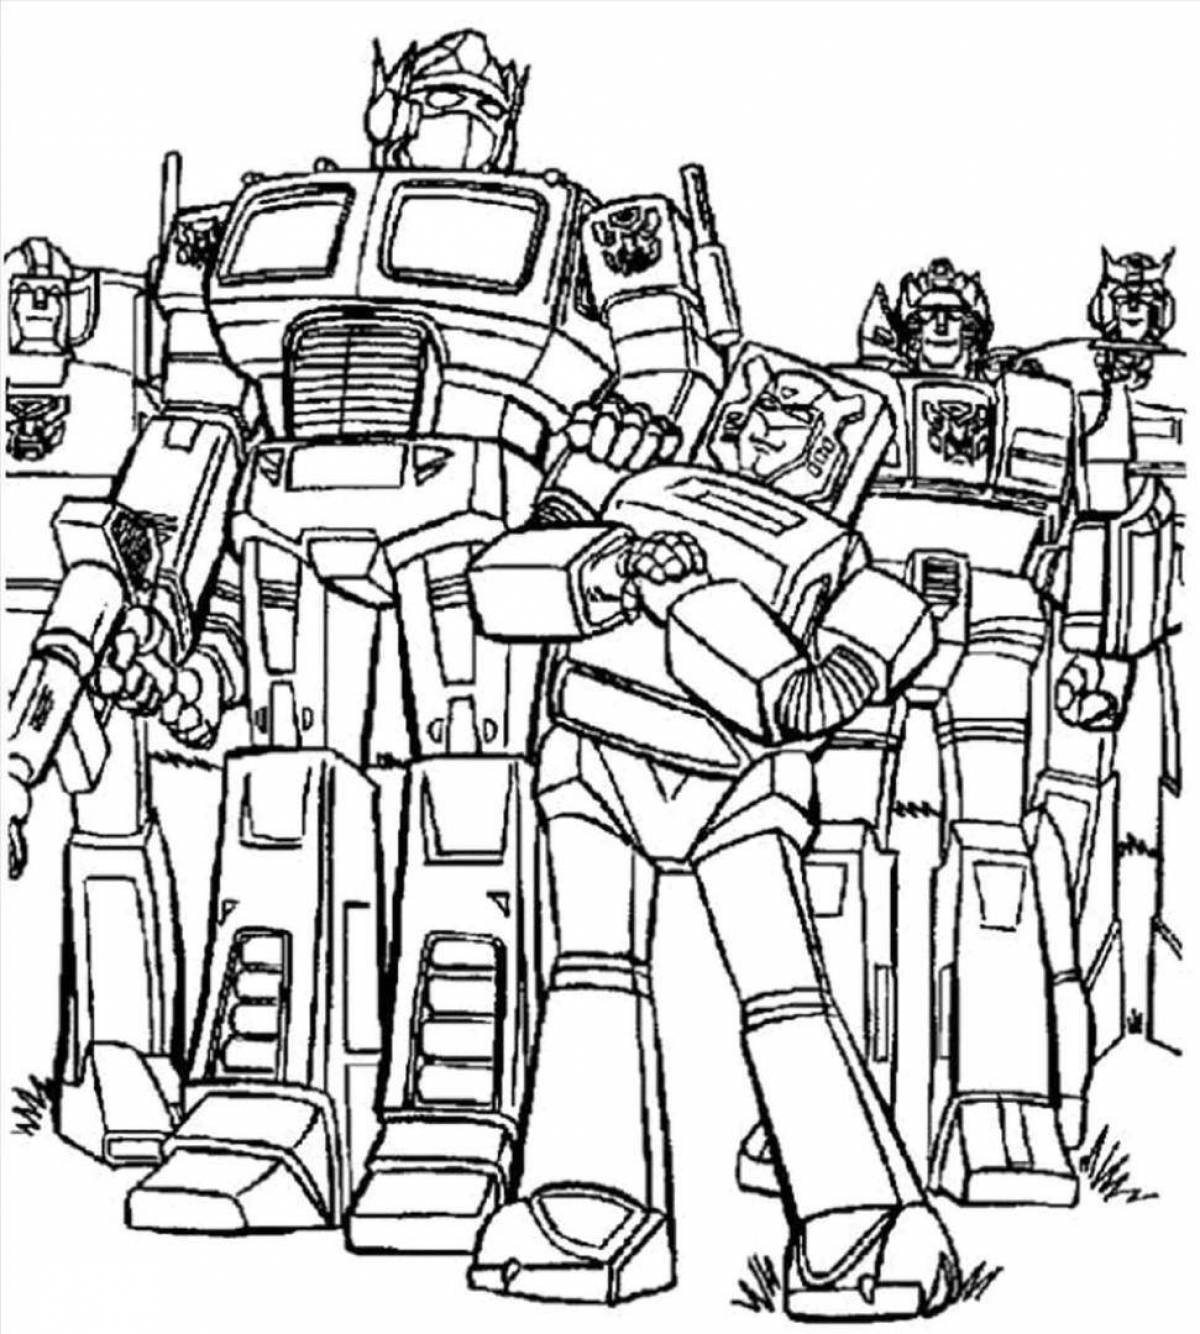 Optimus robot colorful coloring page